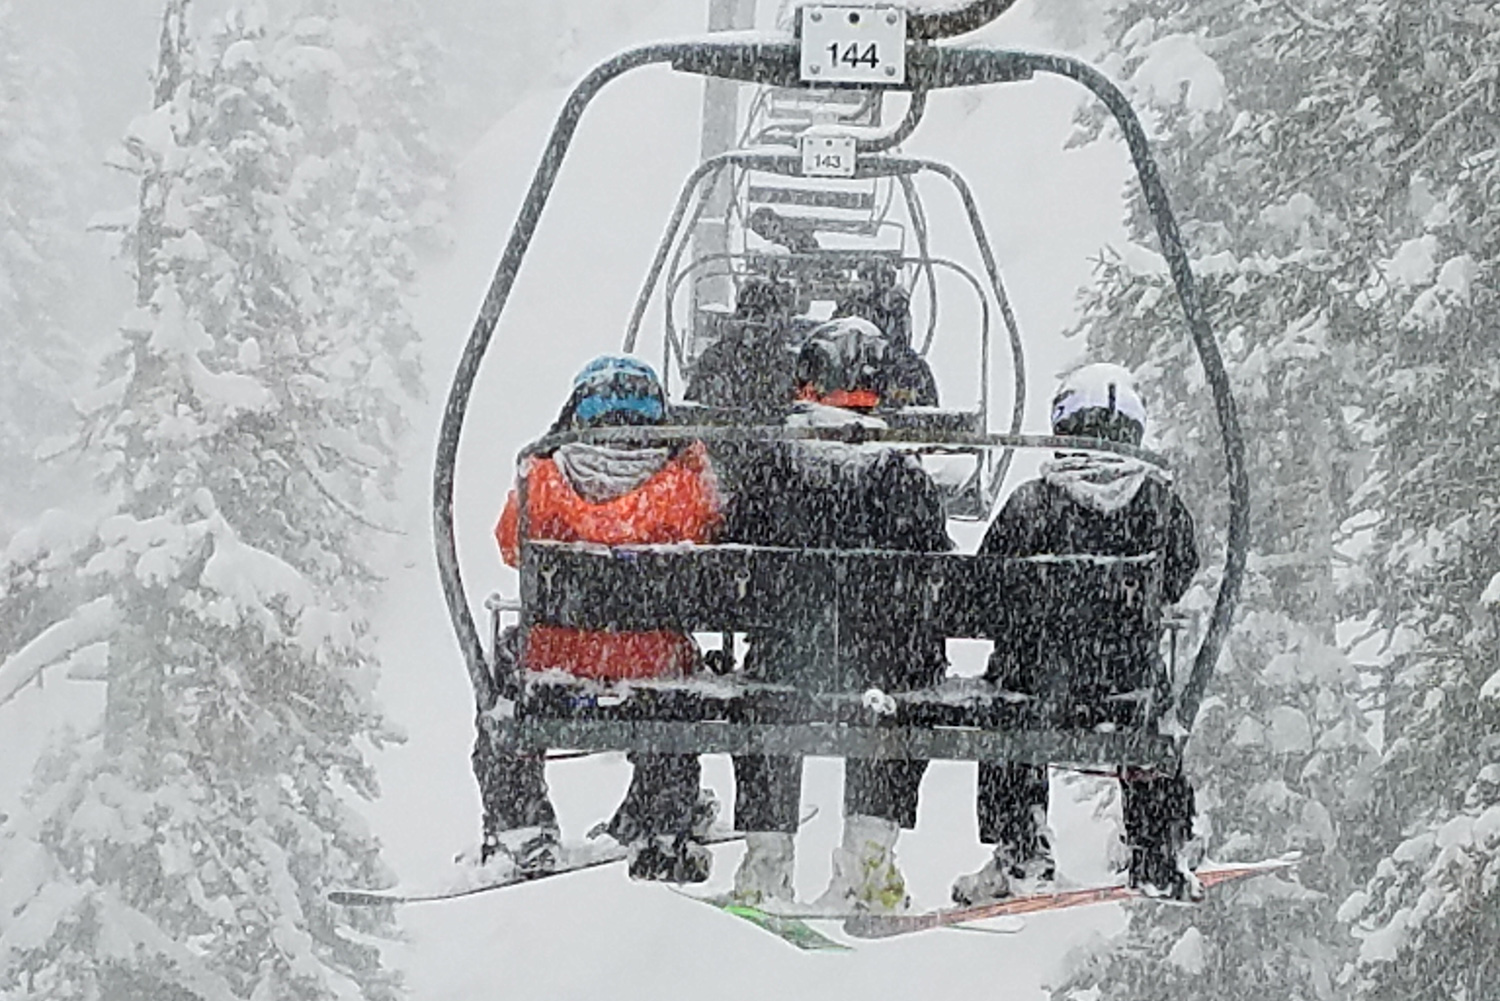 students on chairlift